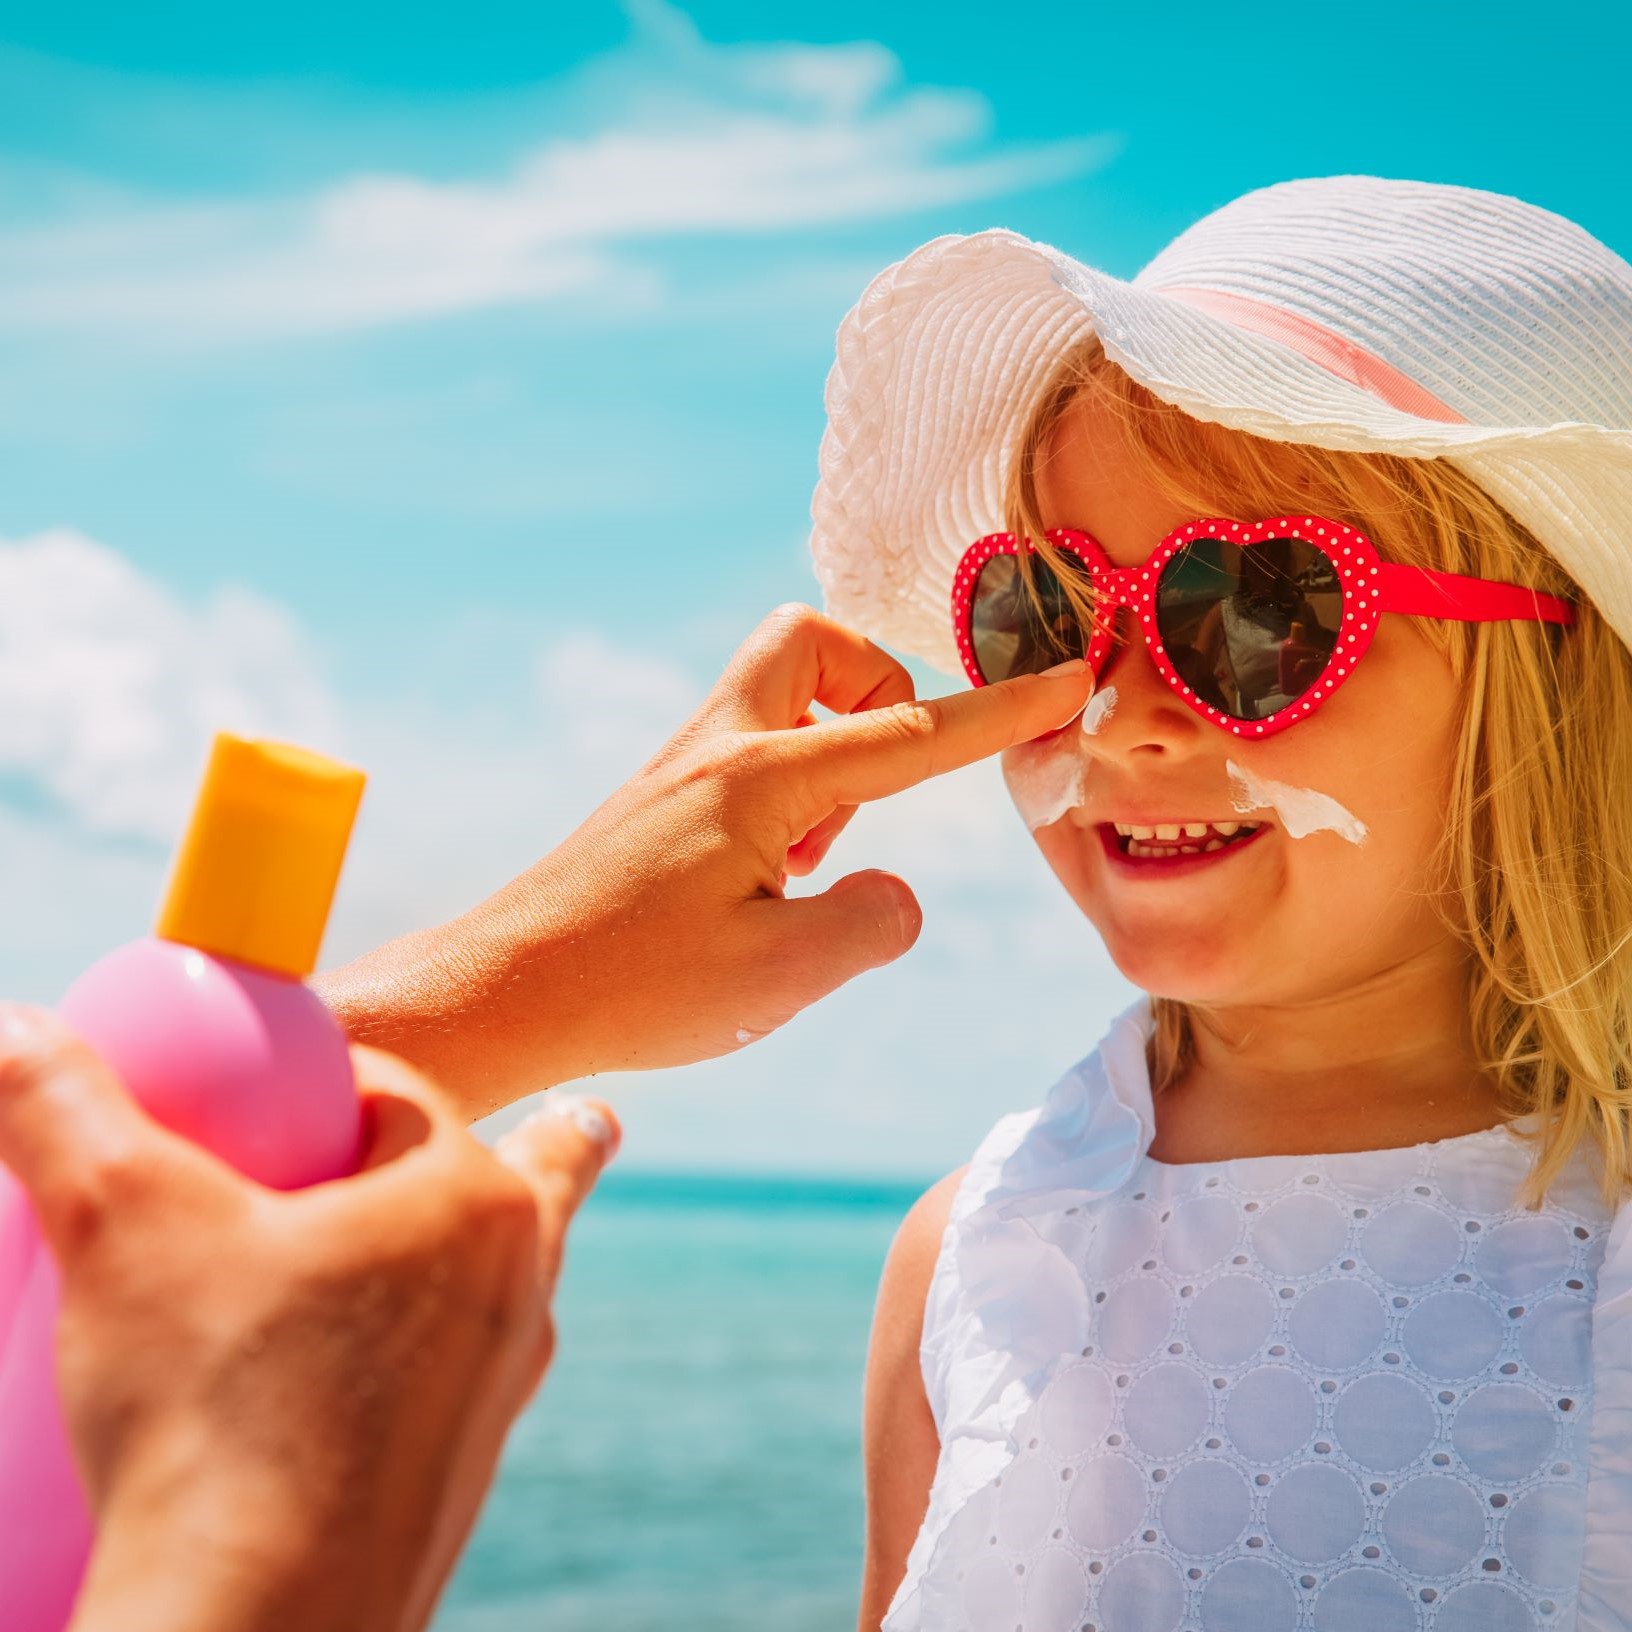 Why Sunscreen is so important